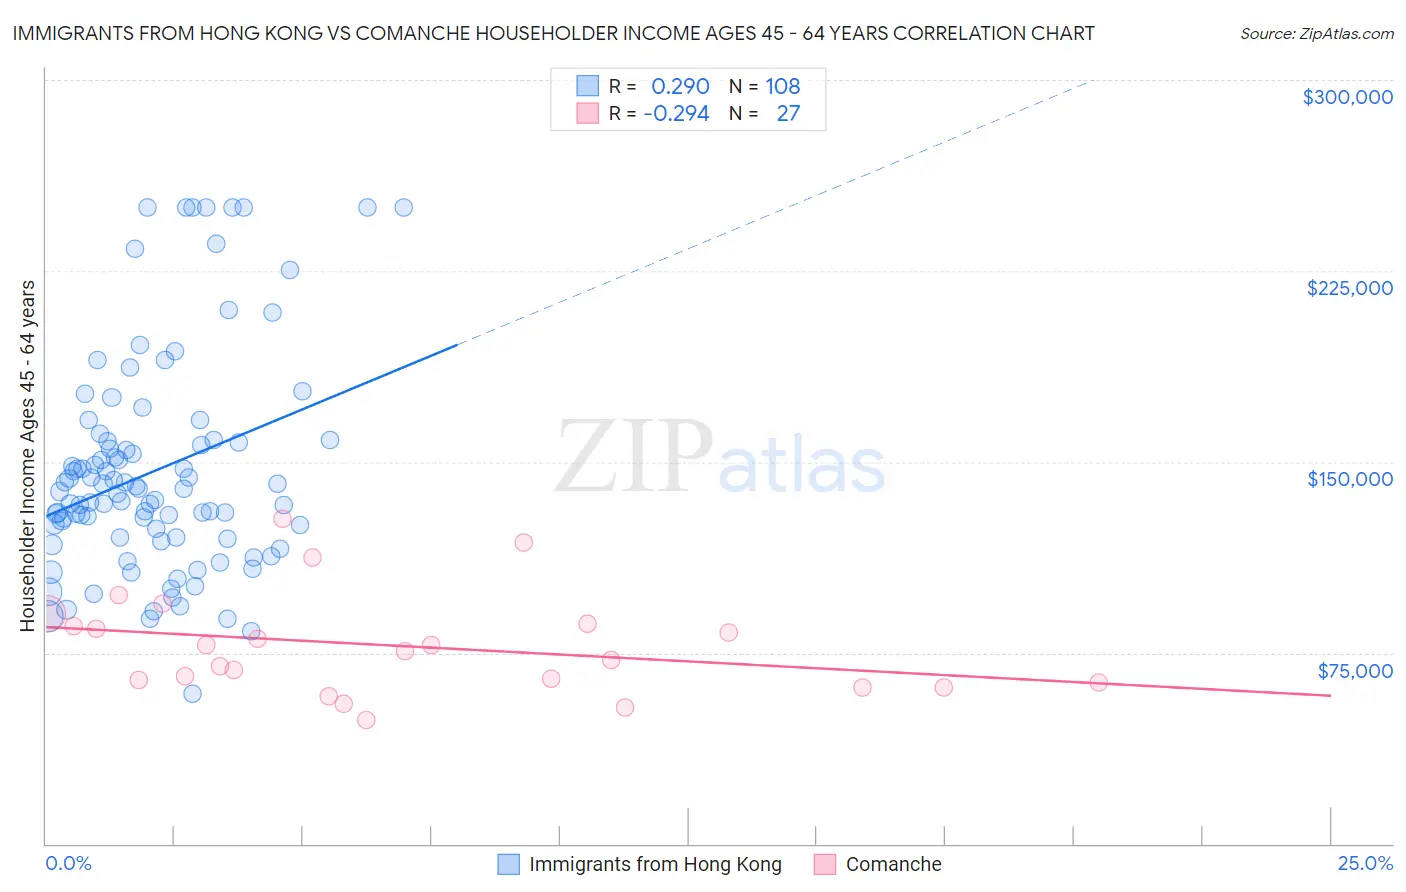 Immigrants from Hong Kong vs Comanche Householder Income Ages 45 - 64 years